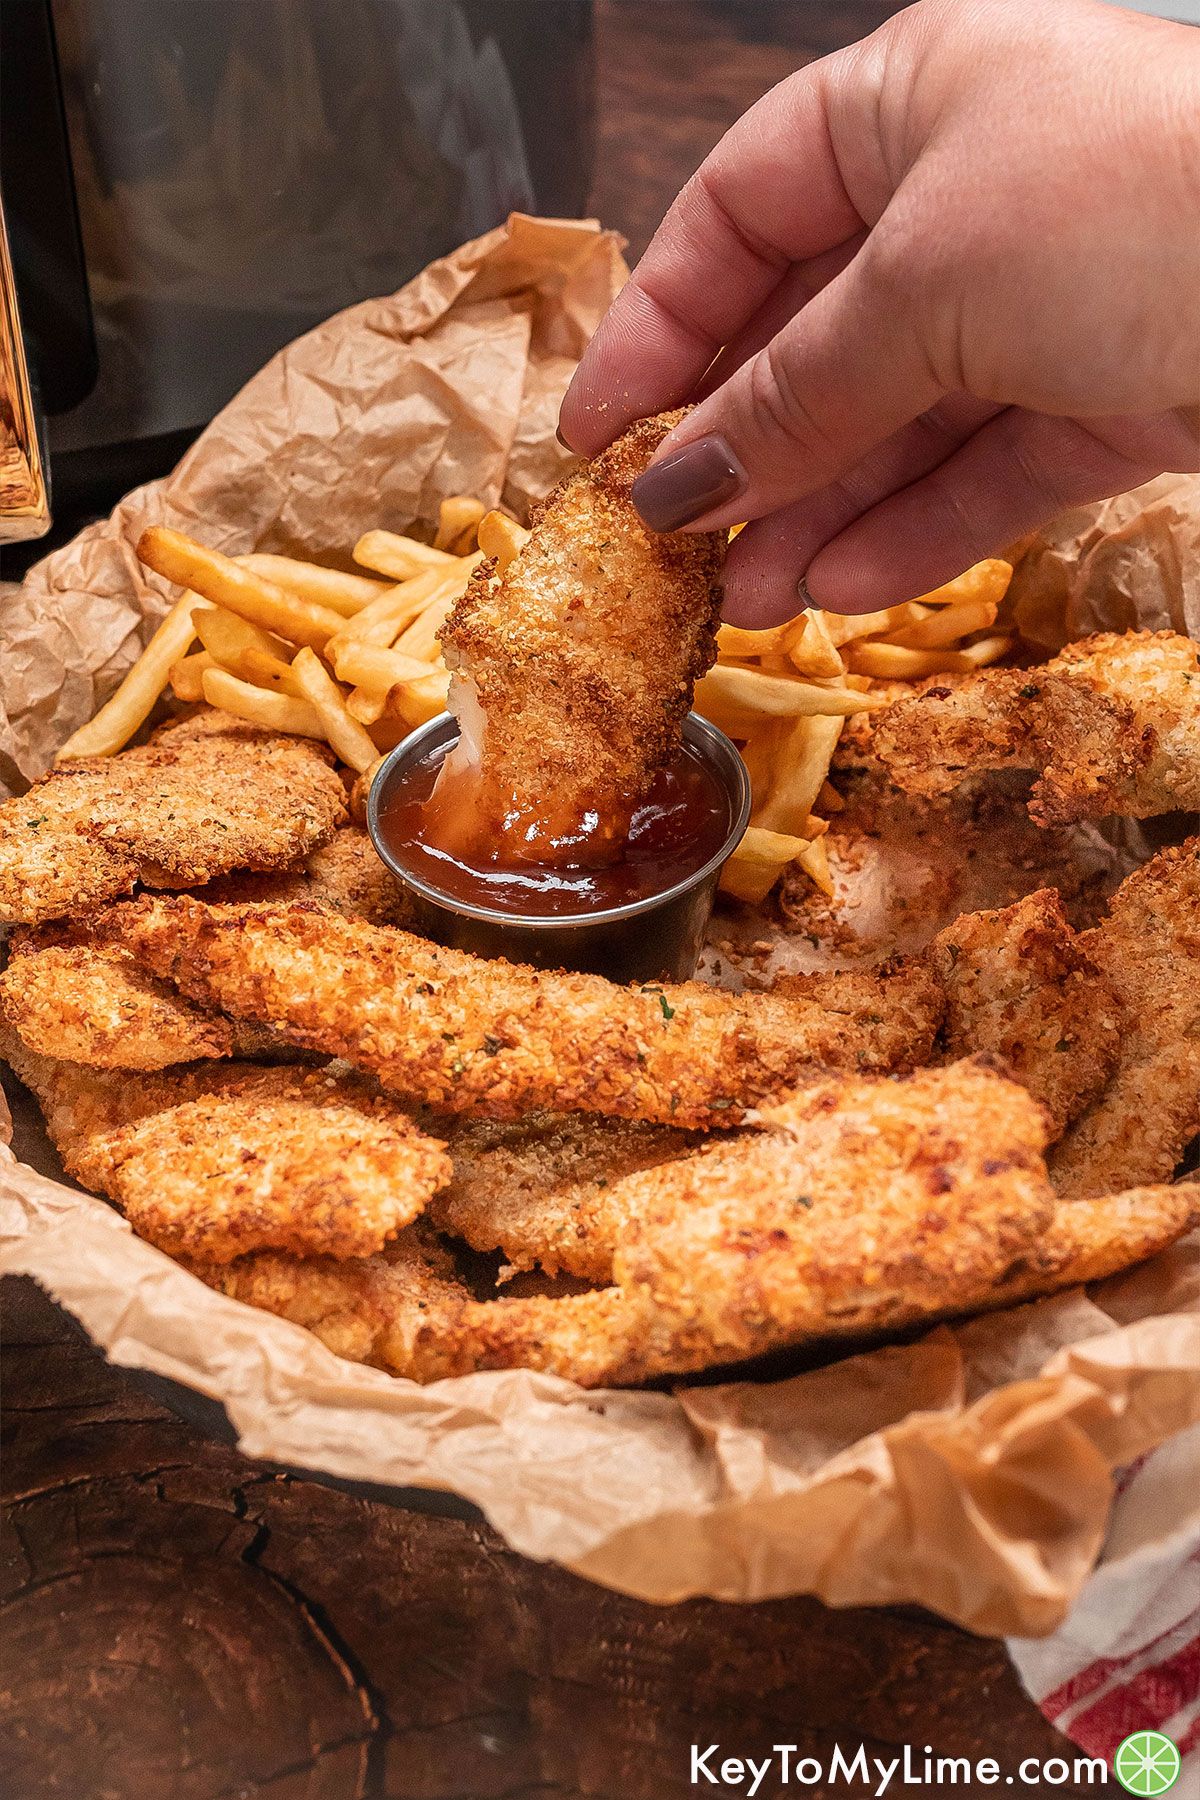 A juicy chicken tender being dipped in sauce.